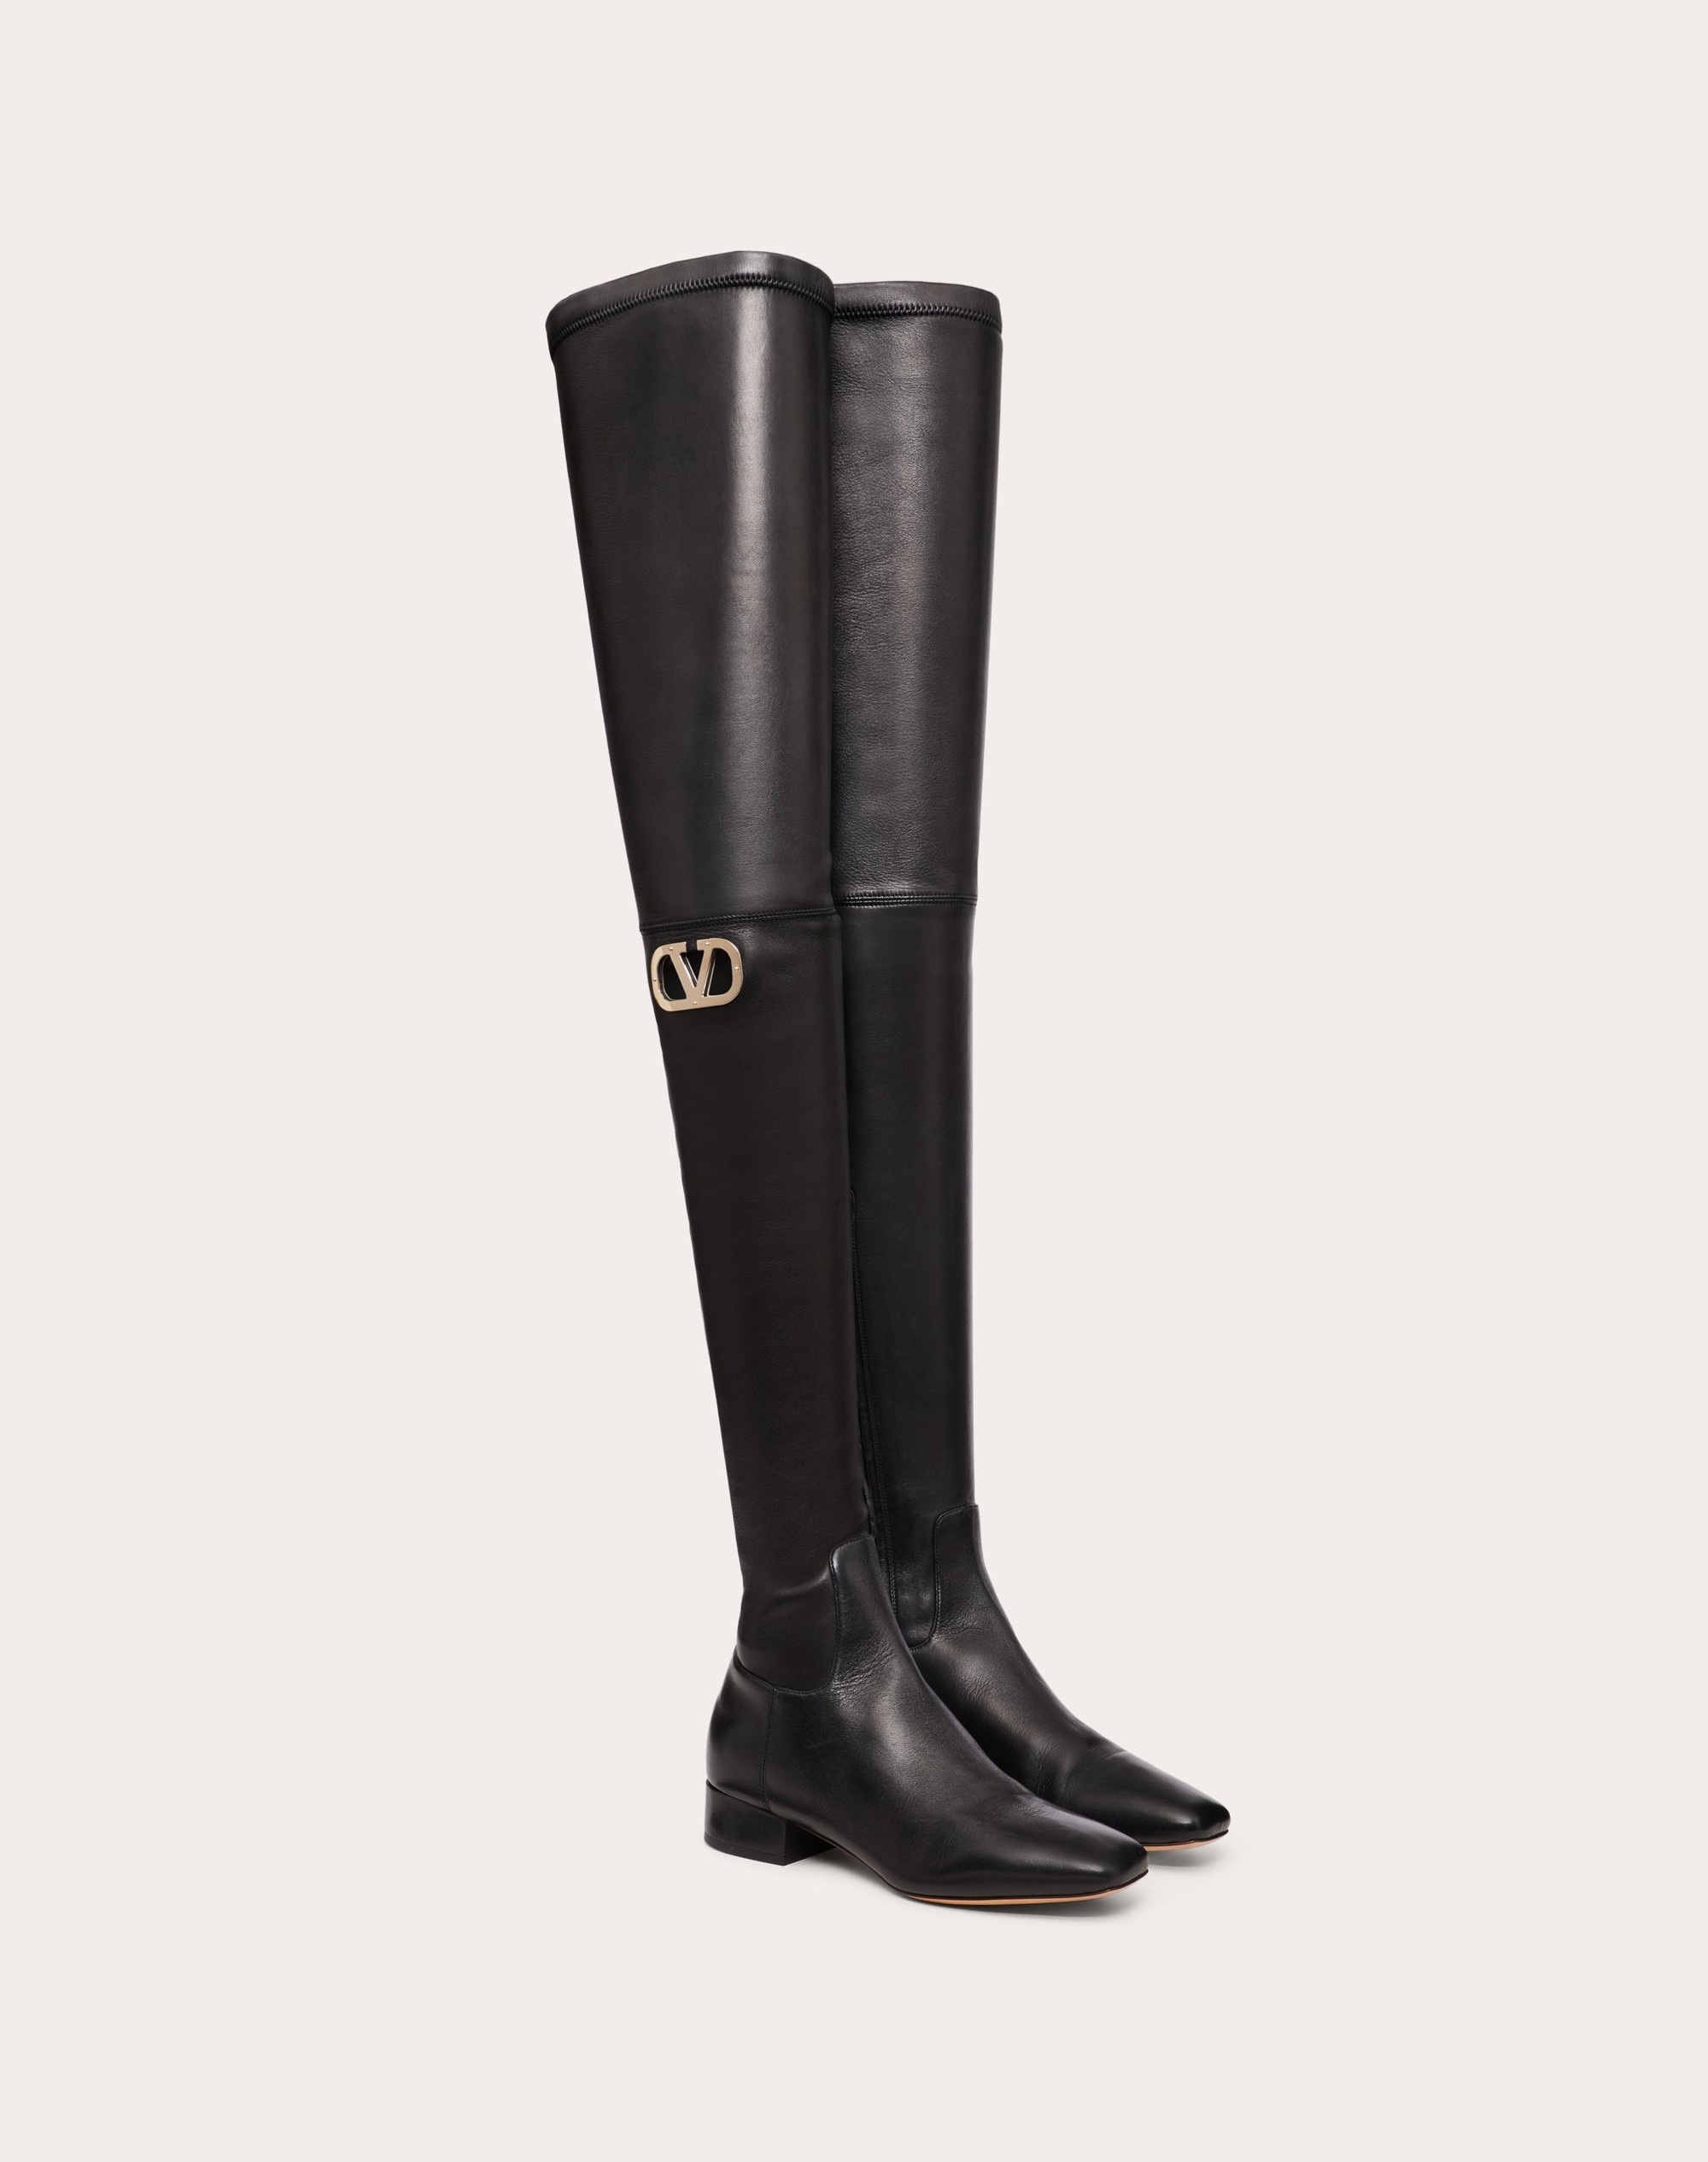 VLOGO TYPE OVER-THE-KNEE BOOT IN STRETCH NAPPA 30MM - 2